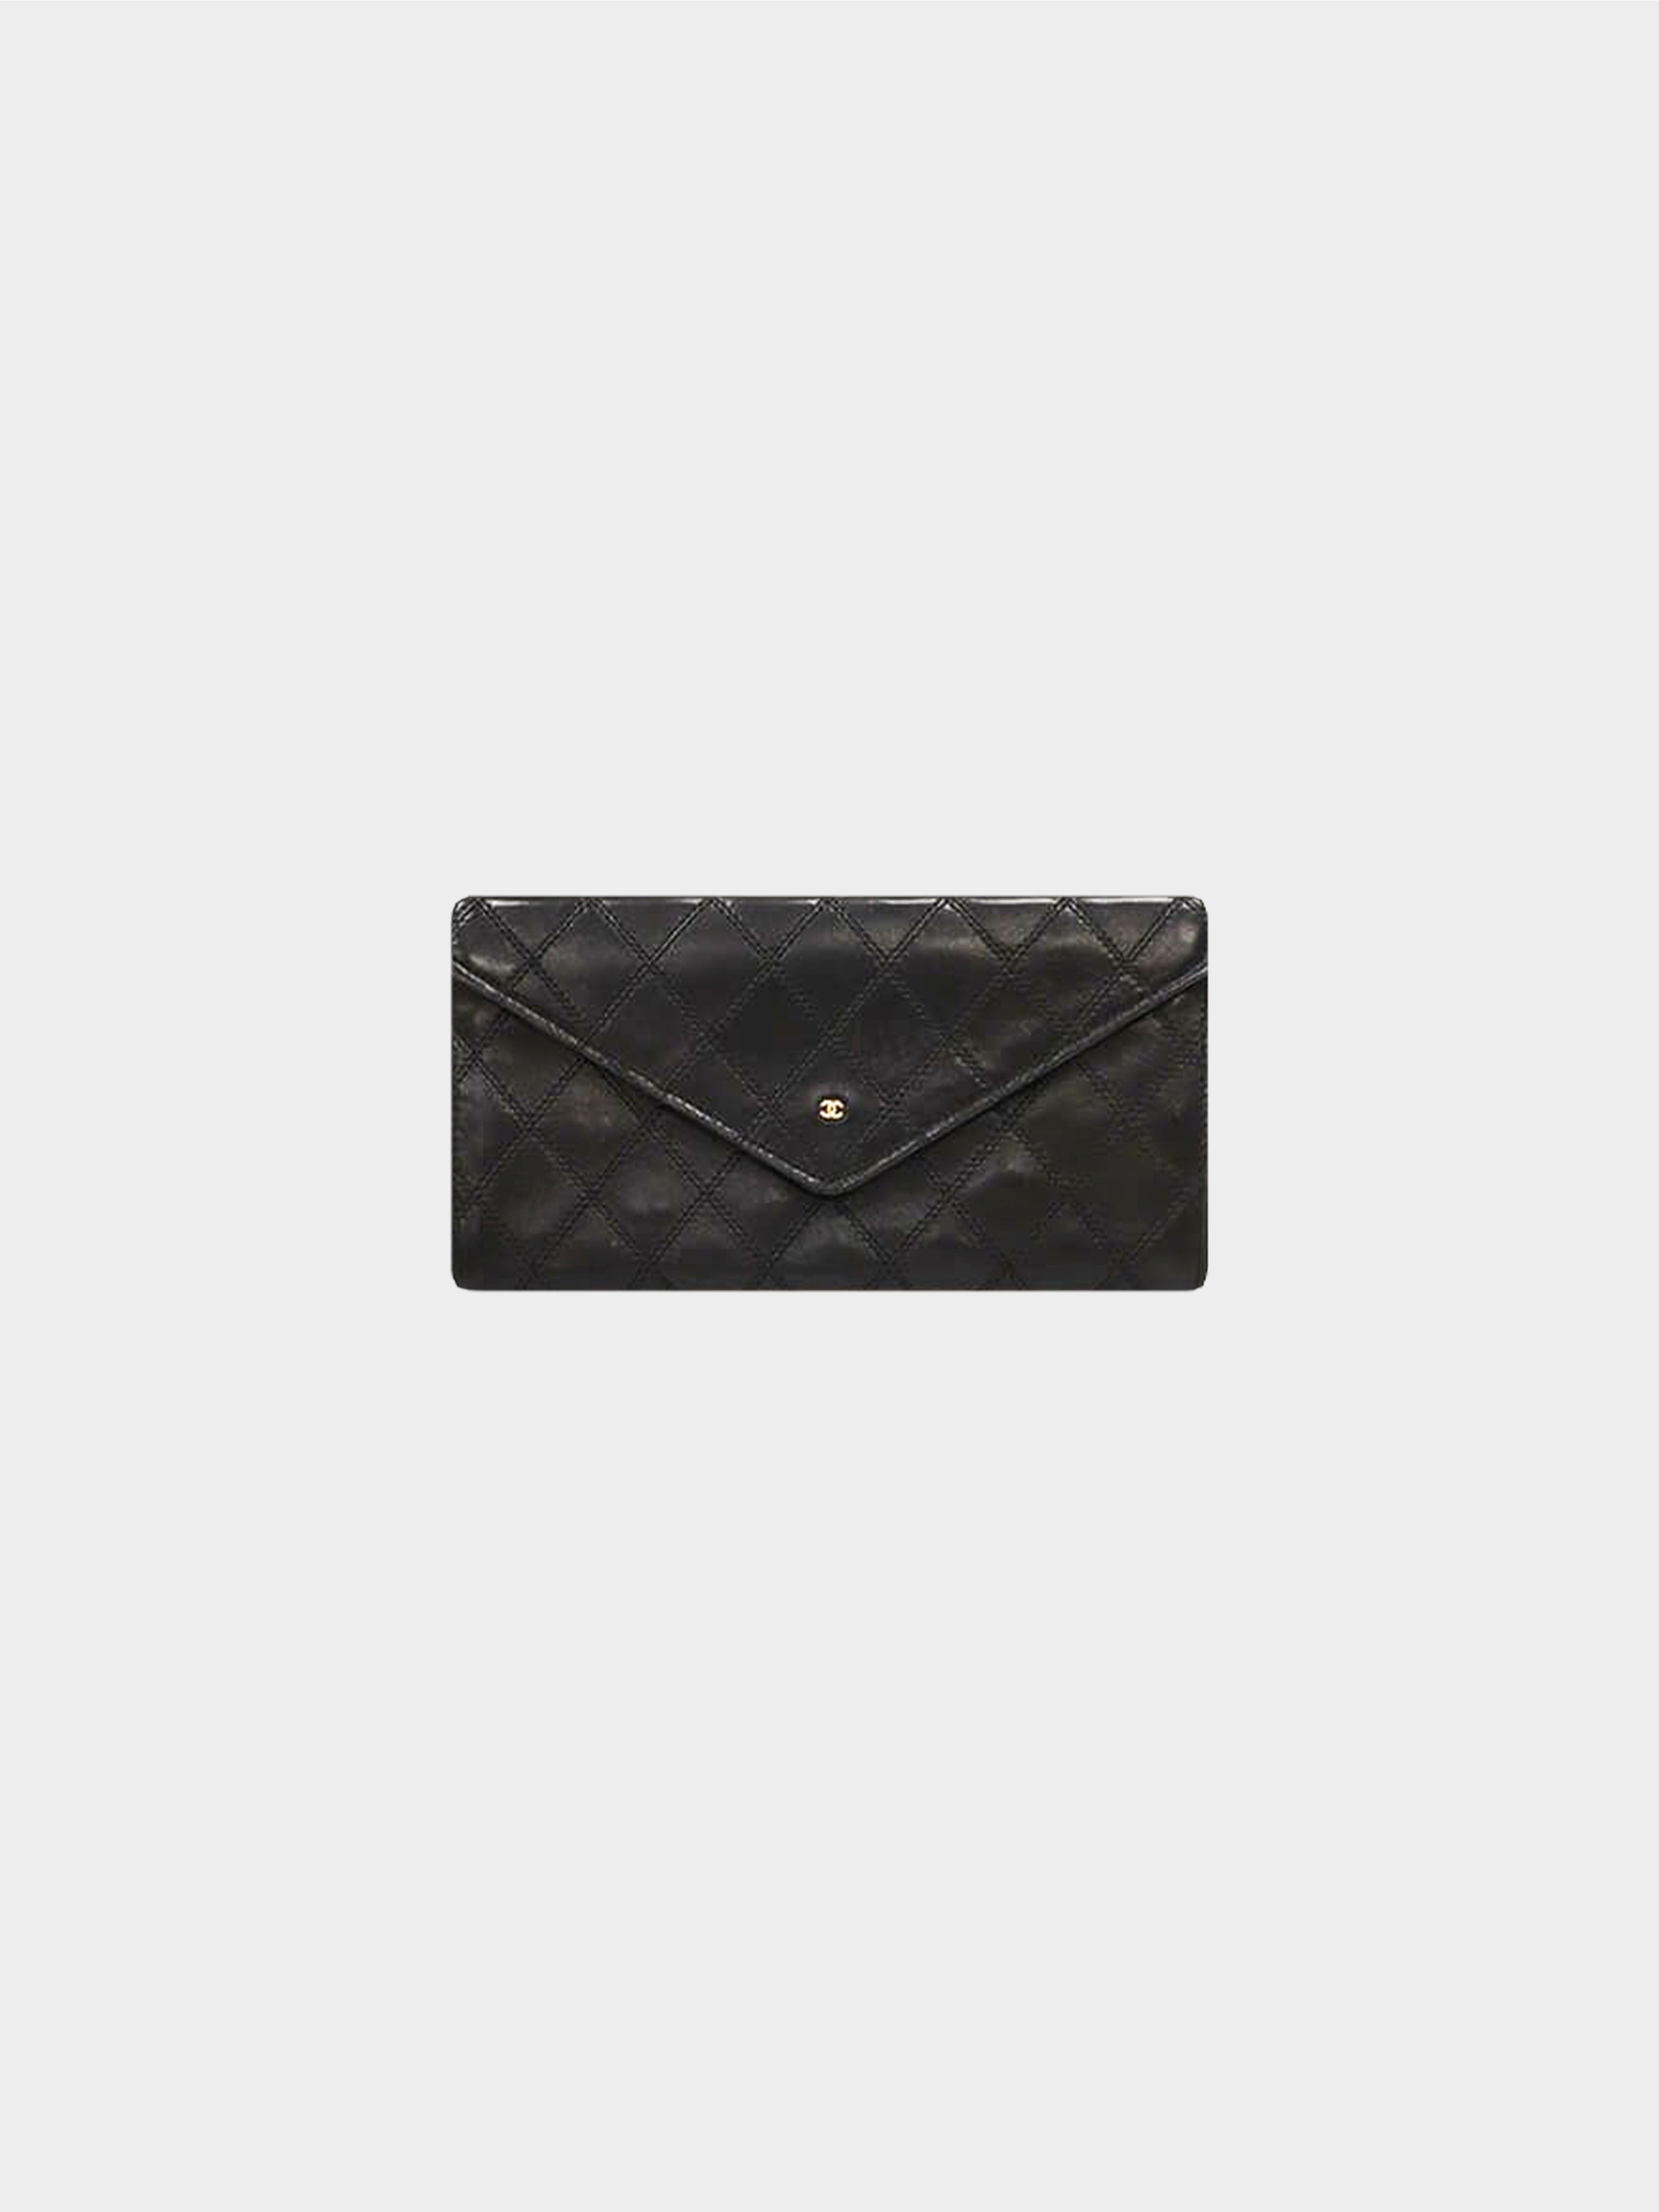 1990s Chanel Black Quilted Lambskin Leather with Gold Tone